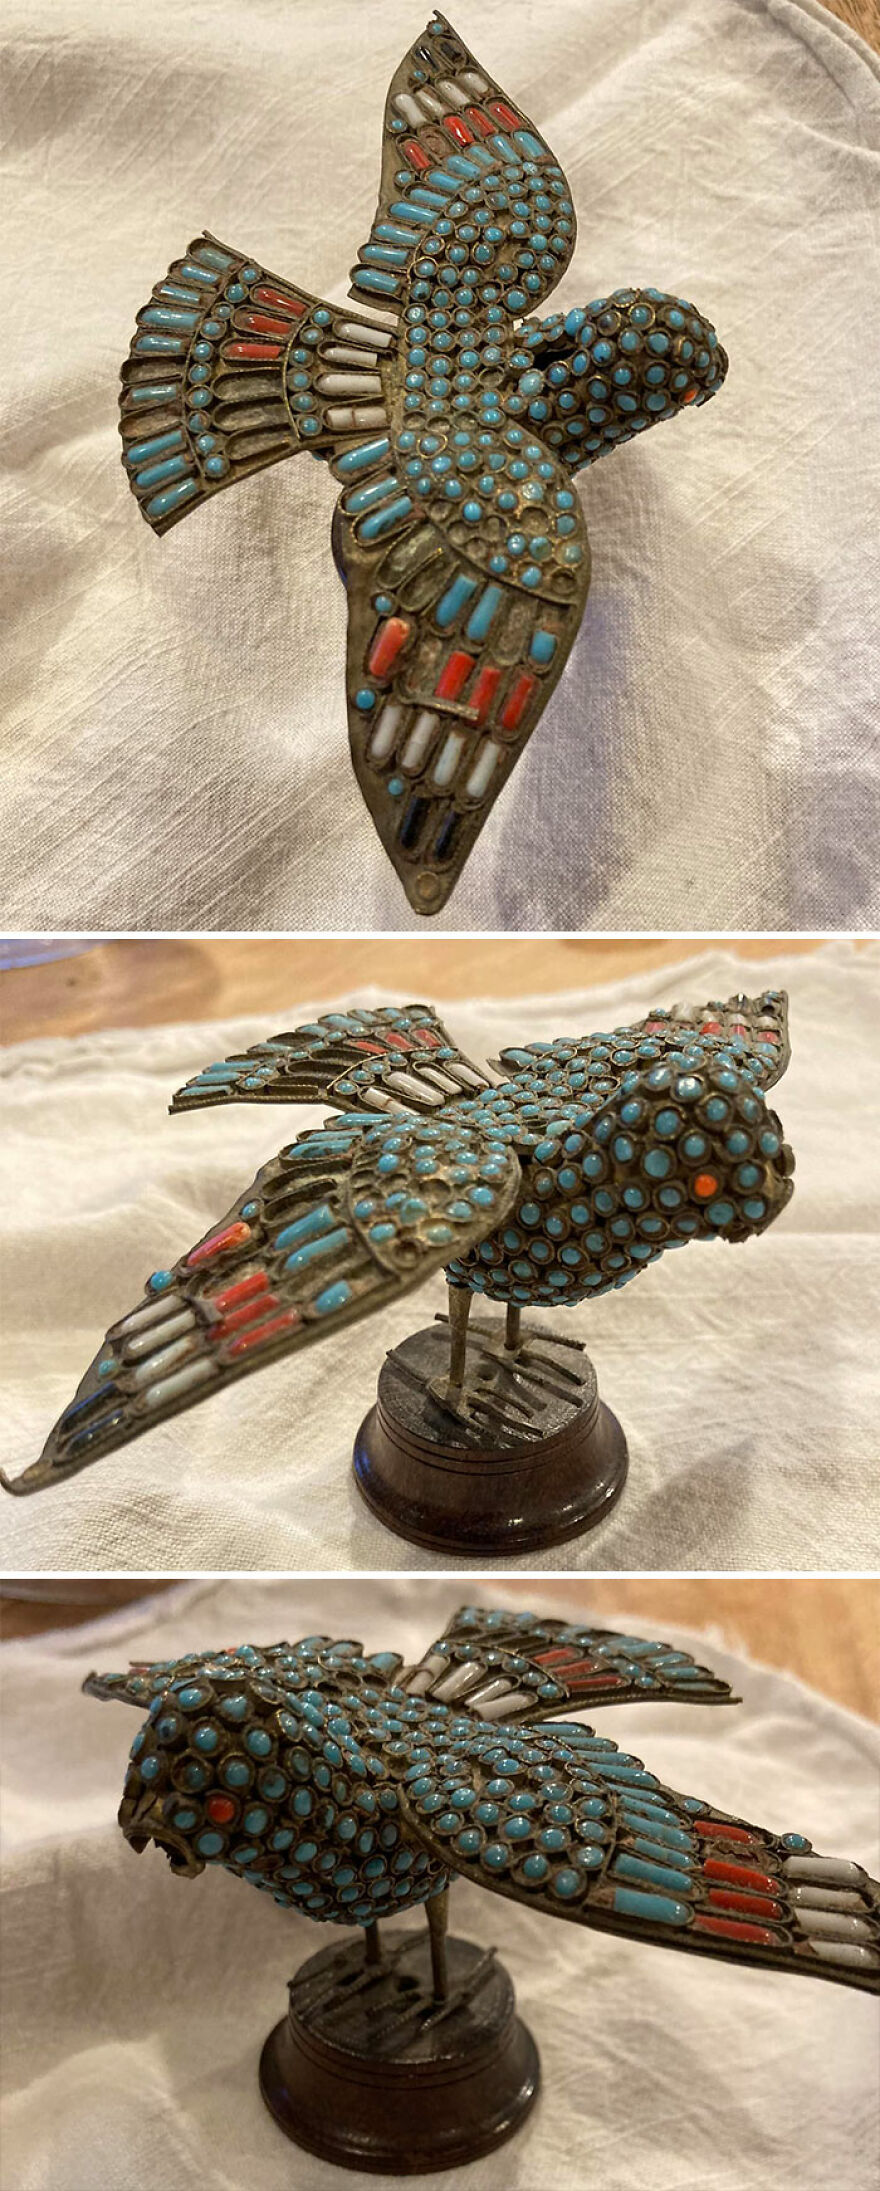 Found This Bird Today In An Antique Shop; It’s A Little Worse For Wear, Missing Its Beak And Several Of The Stones/Beads(?) But I Fell In Love With It. For $18 It Came Home With Me. No Makers Marks Anywhere On It